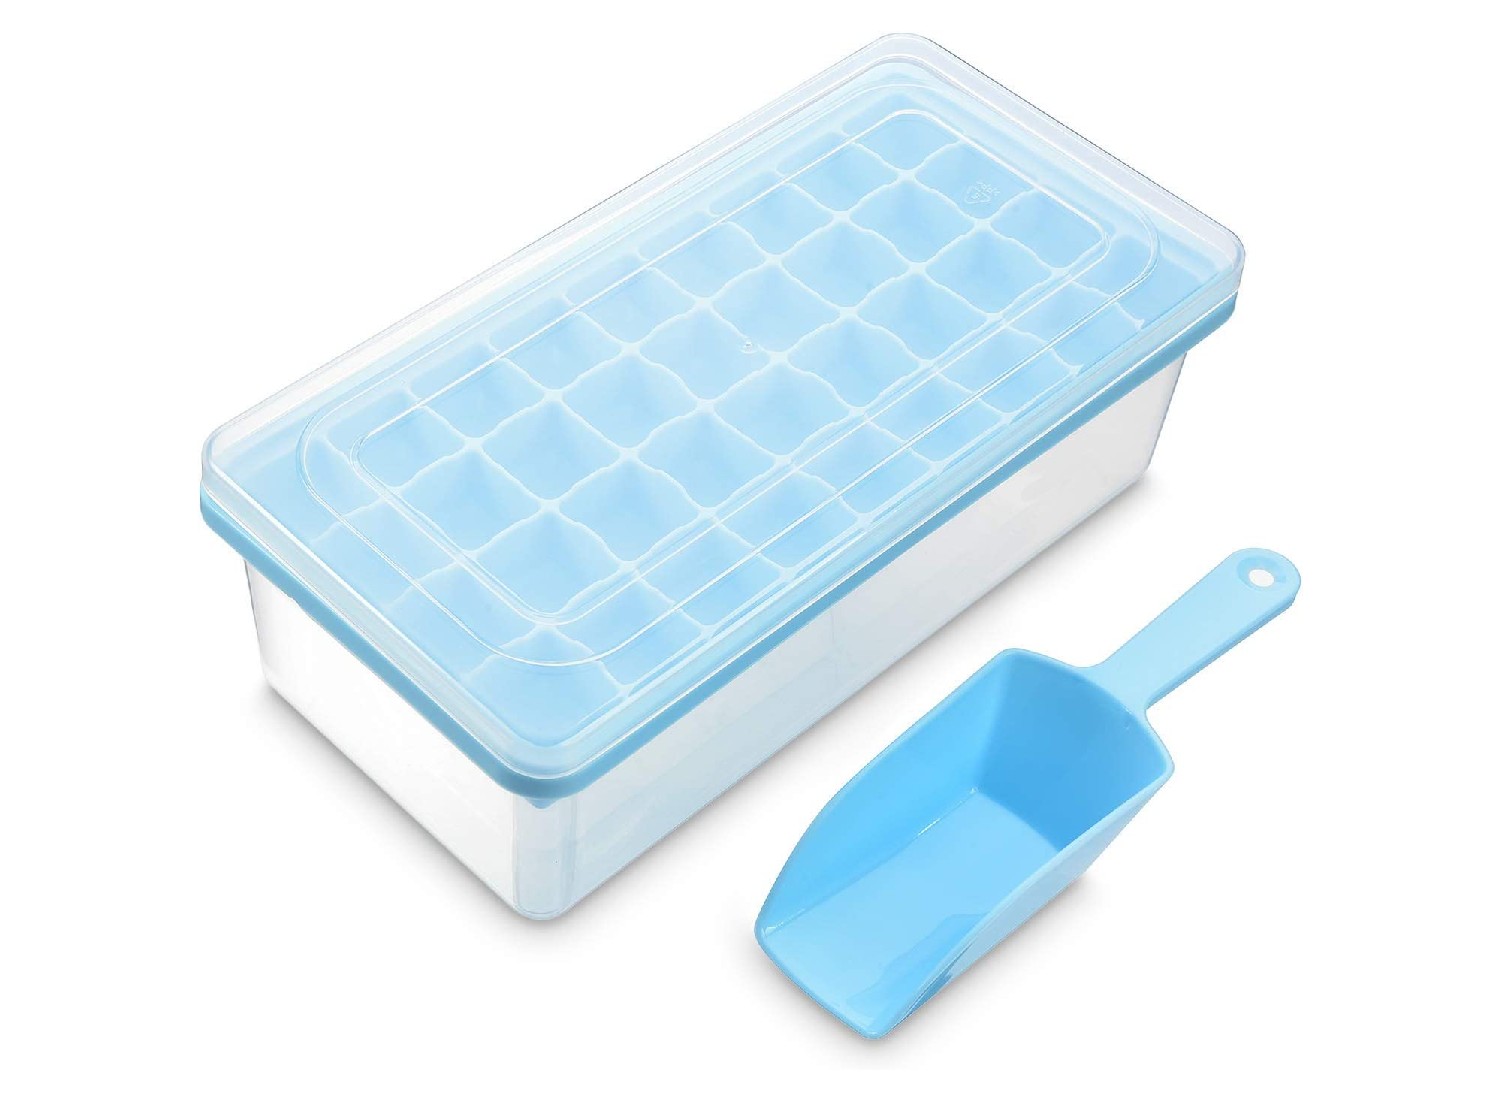 https://www.cuisineathome.com/review/wp-content/uploads/2022/11/ice-cube-tray.jpg